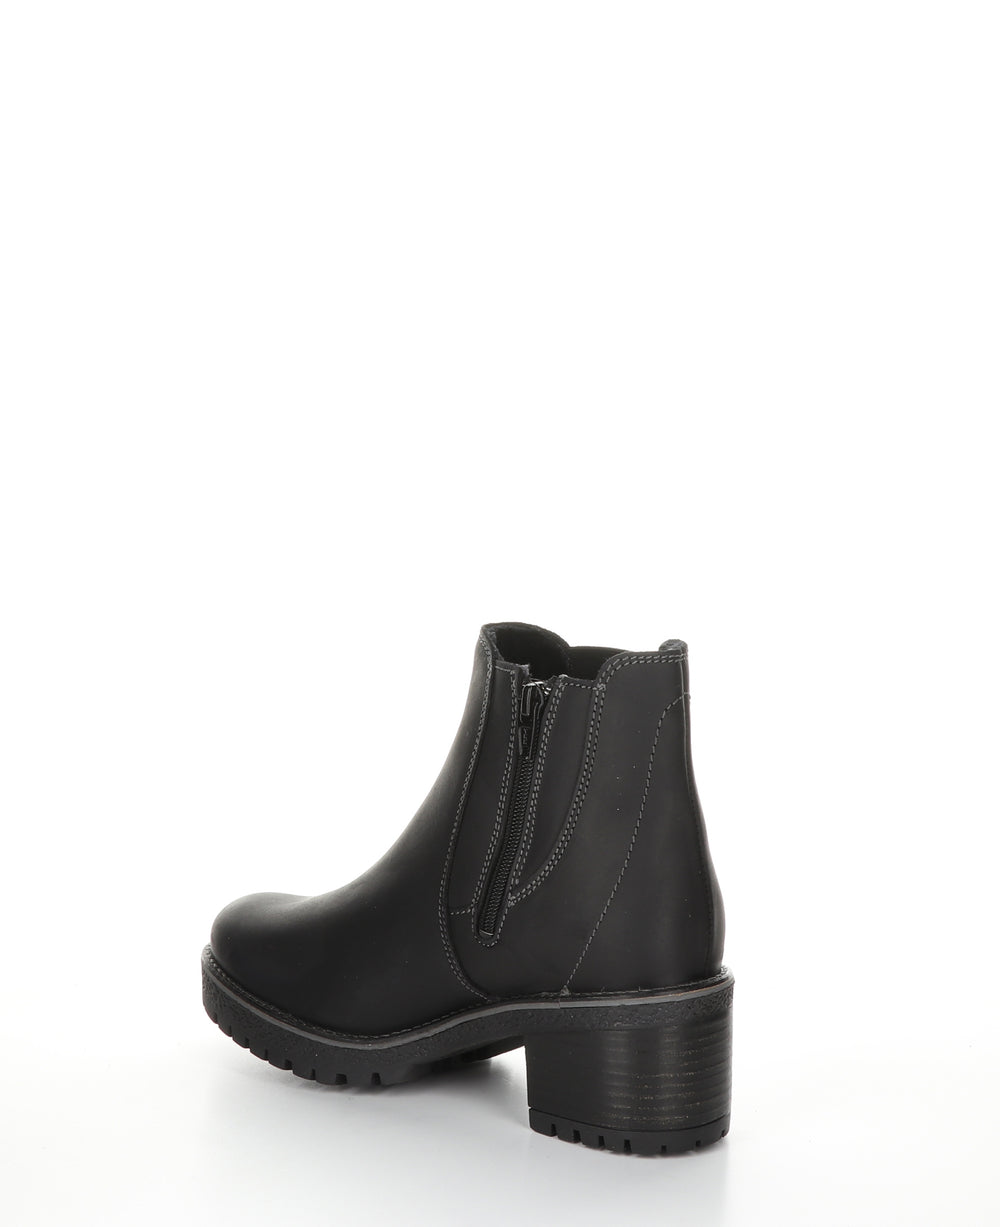 MASS Black Zip Up Ankle Boots